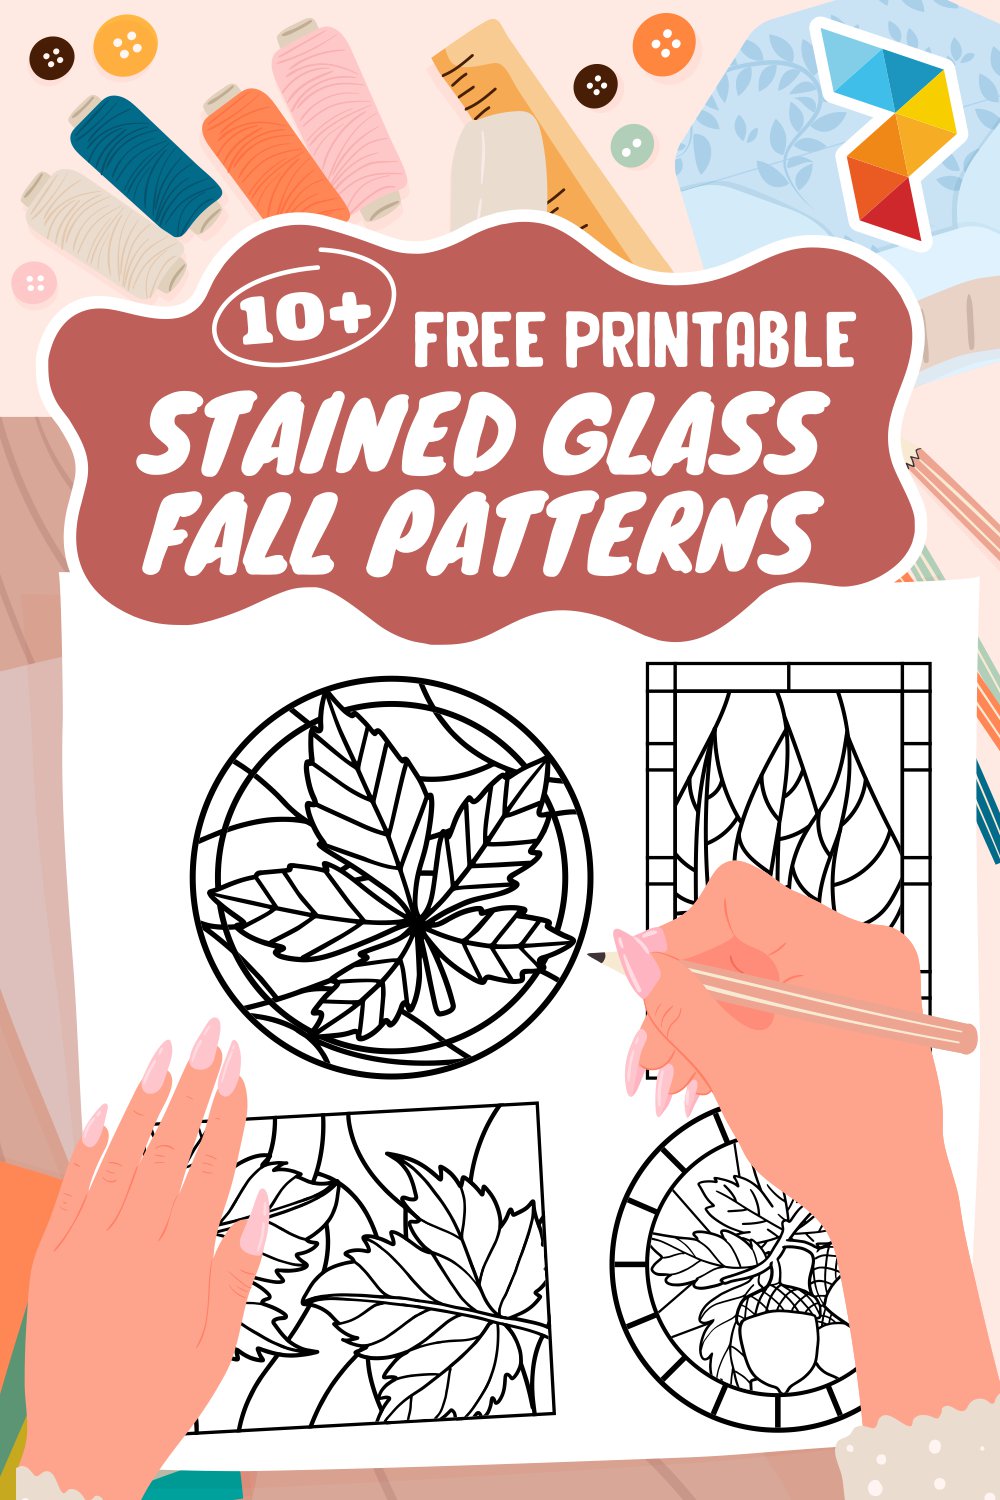 Stained Glass Fall Patterns